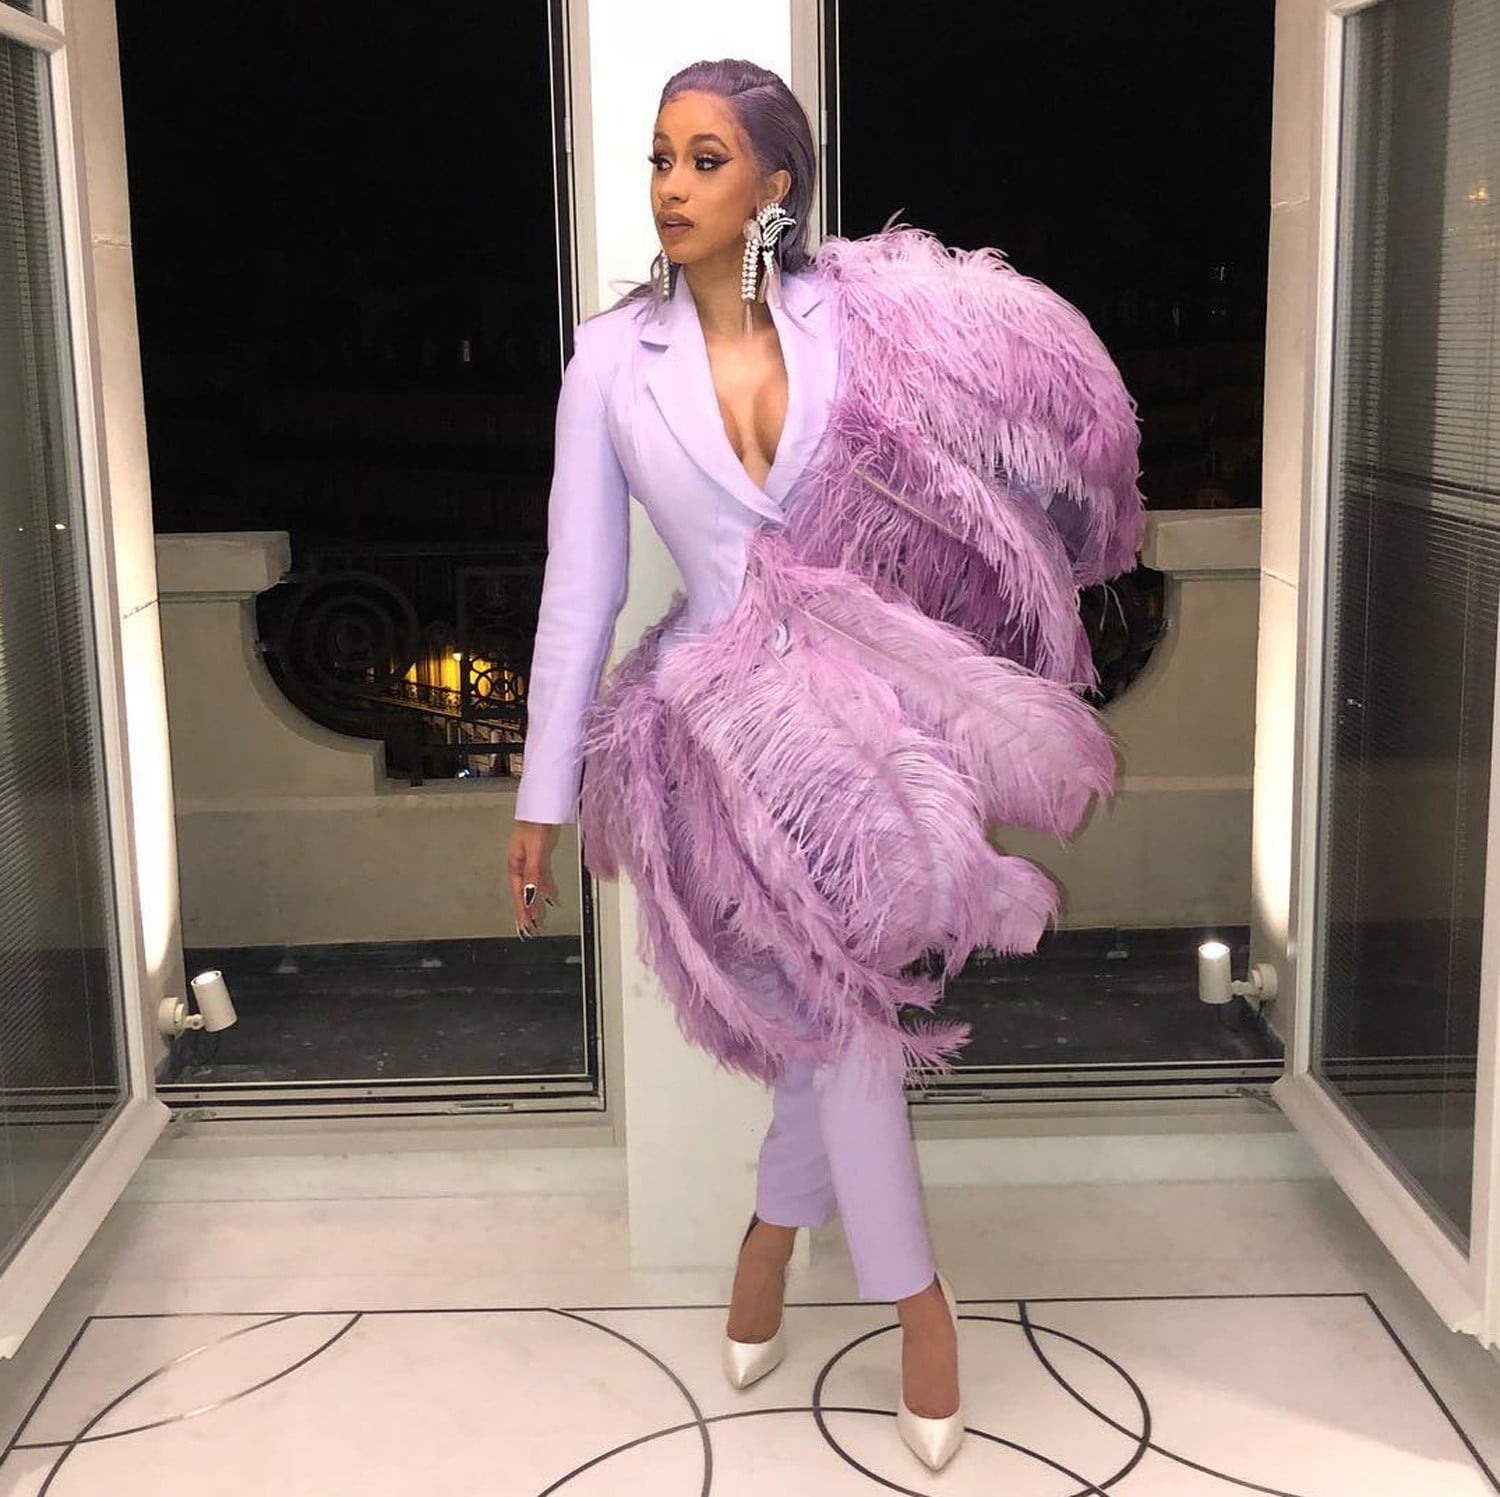 Cardi B's Style Transformation, as Told Through 27 Outfits